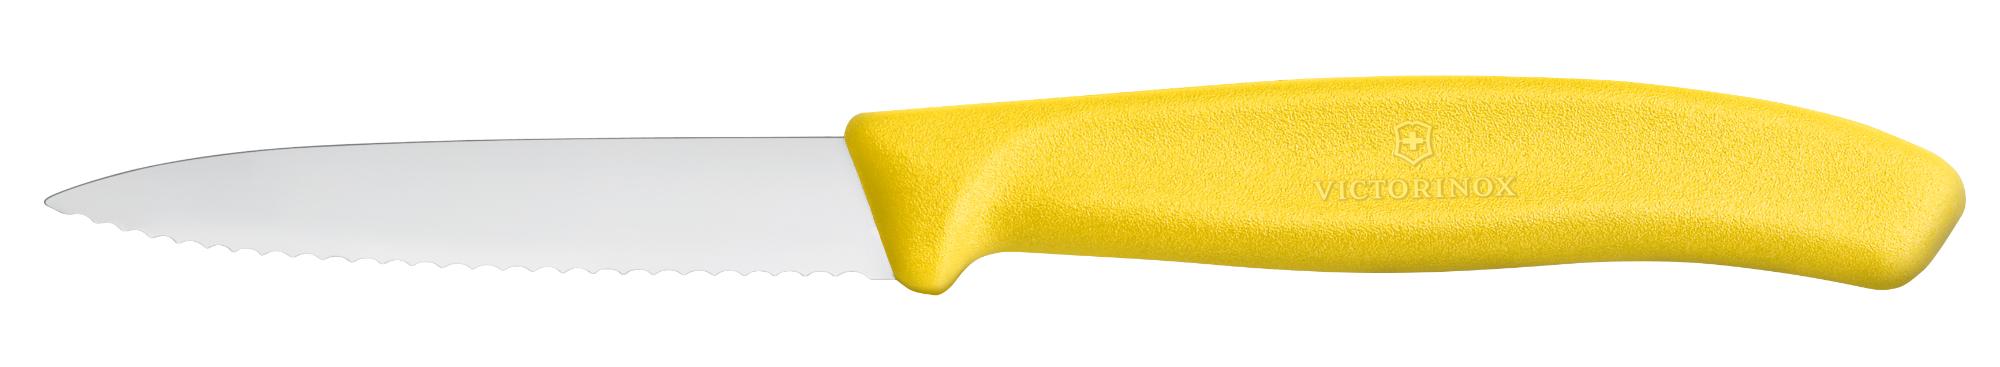 Swiss Classic vegetable knife, serrated, 80 mm - yellow